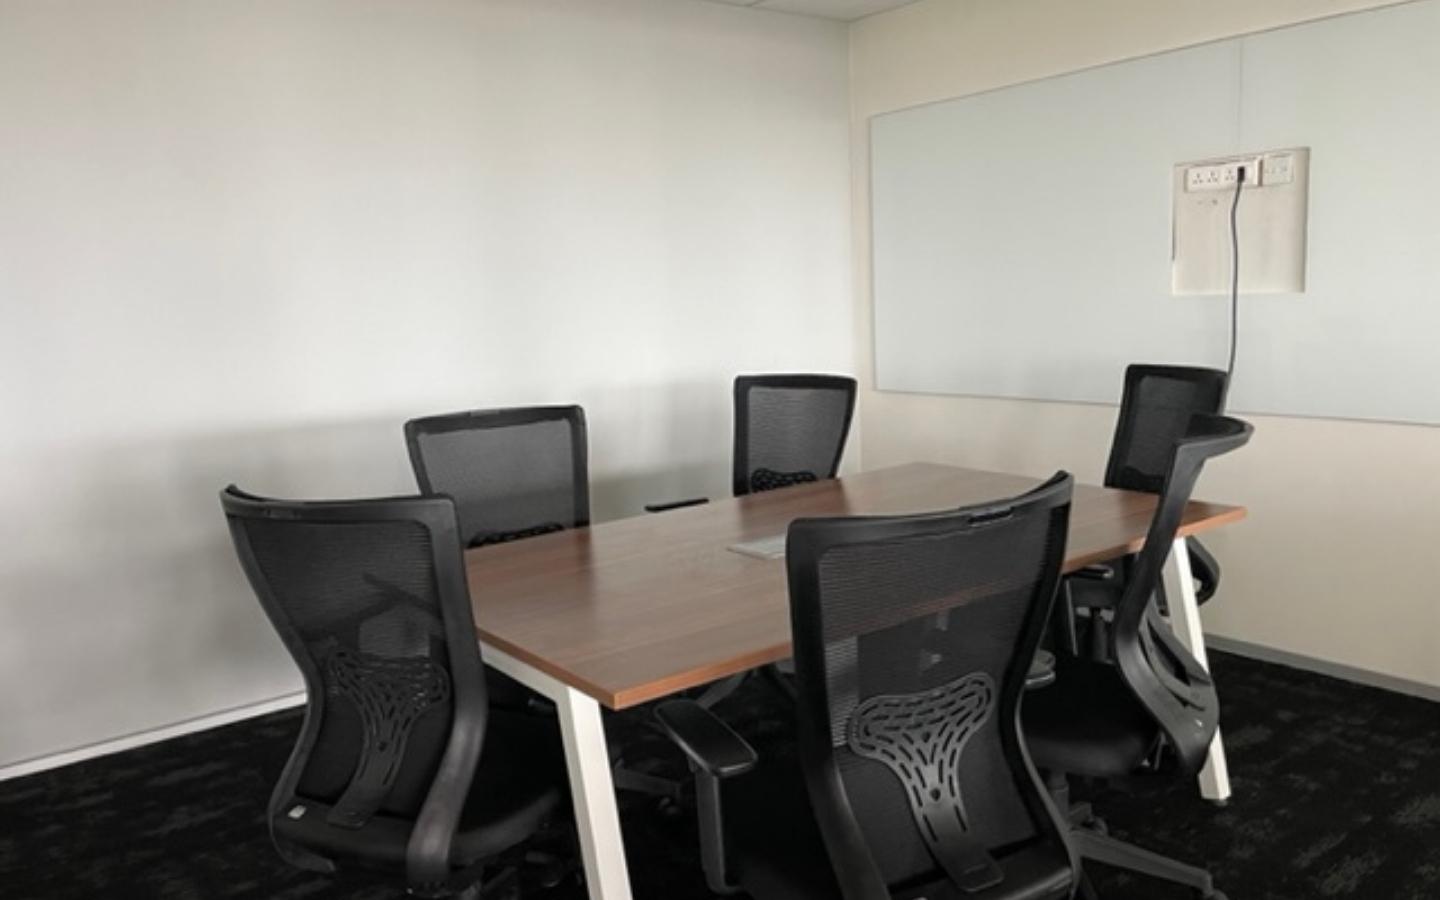 Furnished office space for rent in Embassy golf links, Bangalore